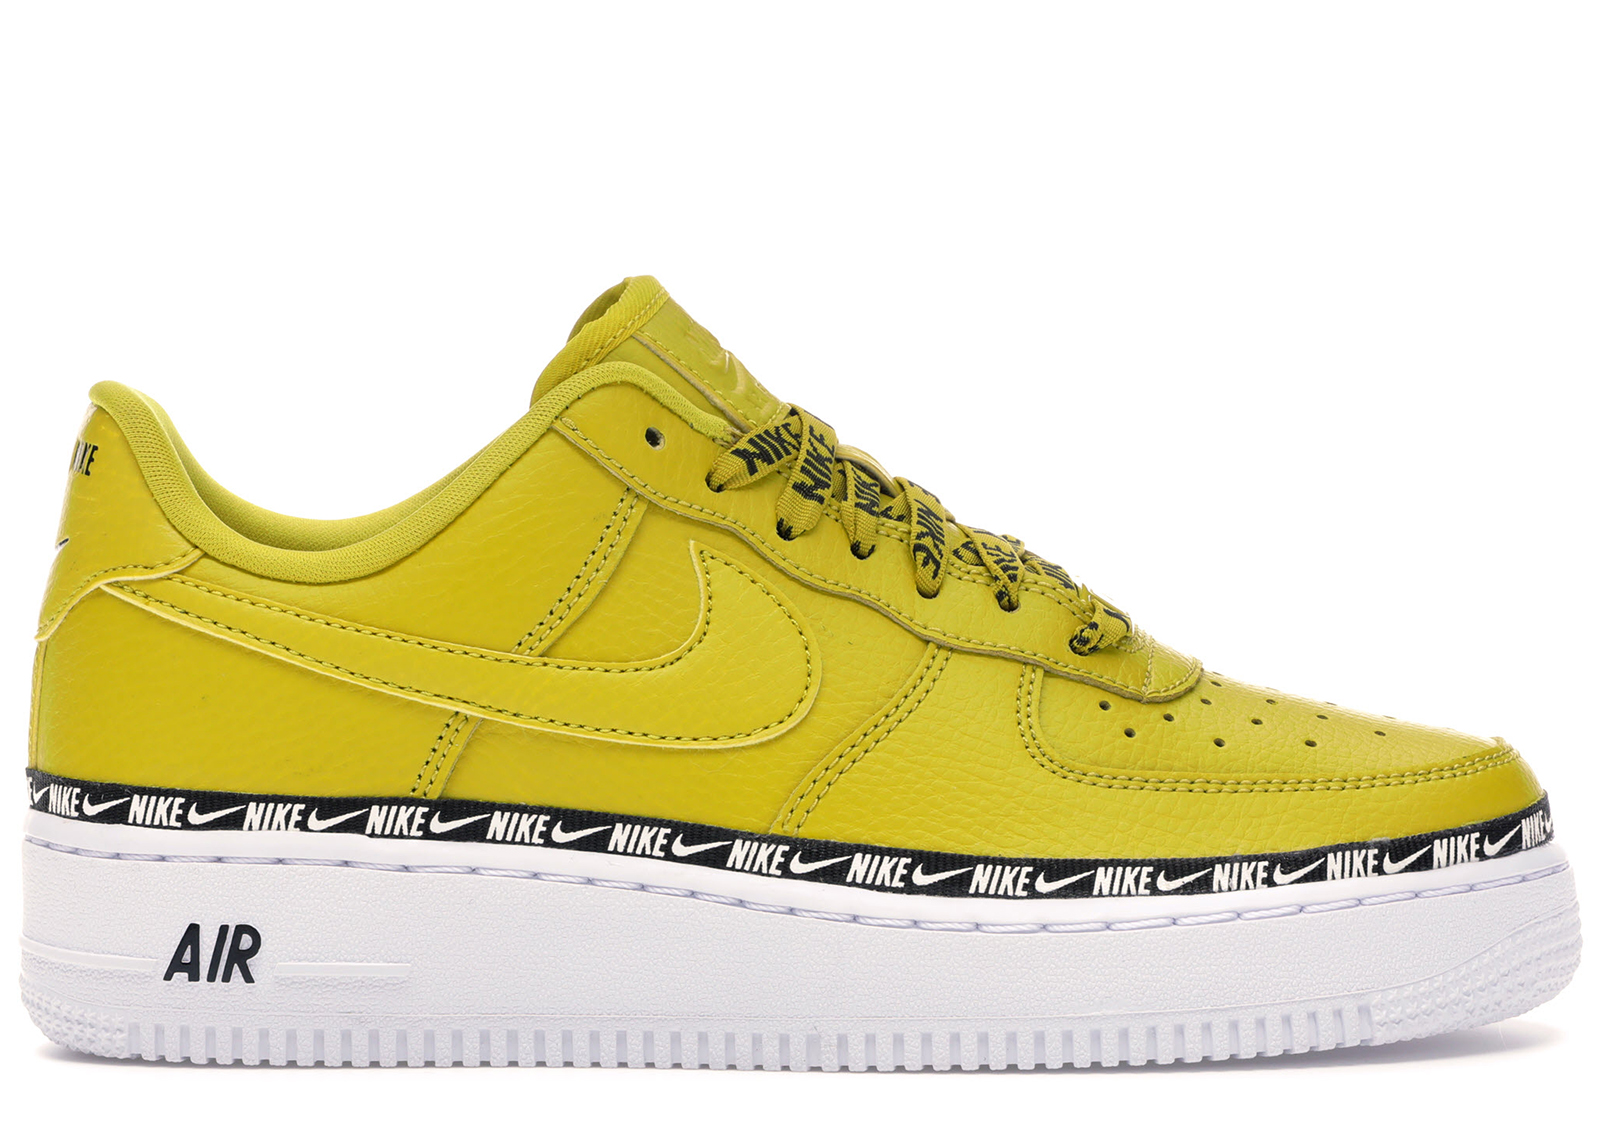 Nike Air Force 1 Low Overbranding Bright Citron (Women's 